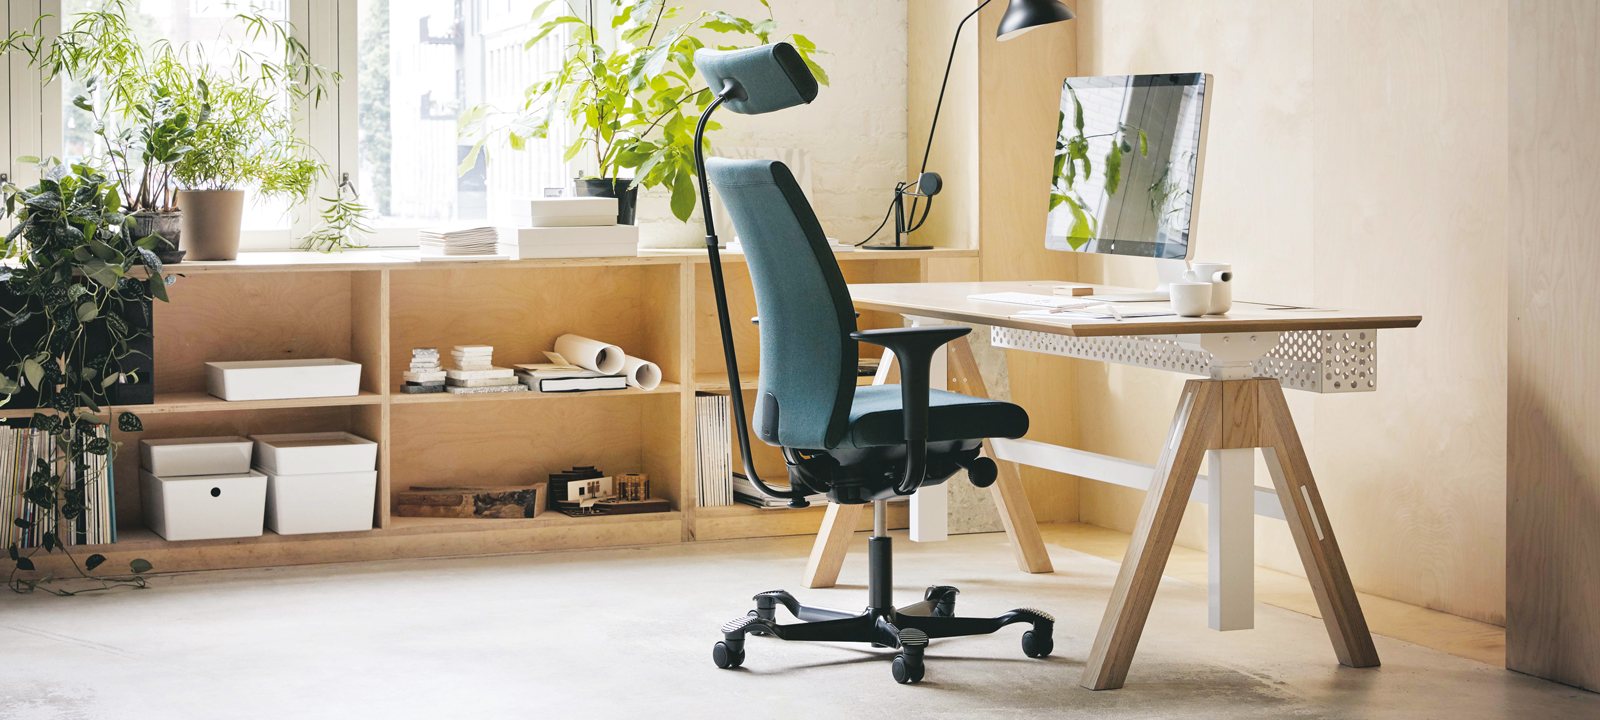 Creed task chair in green